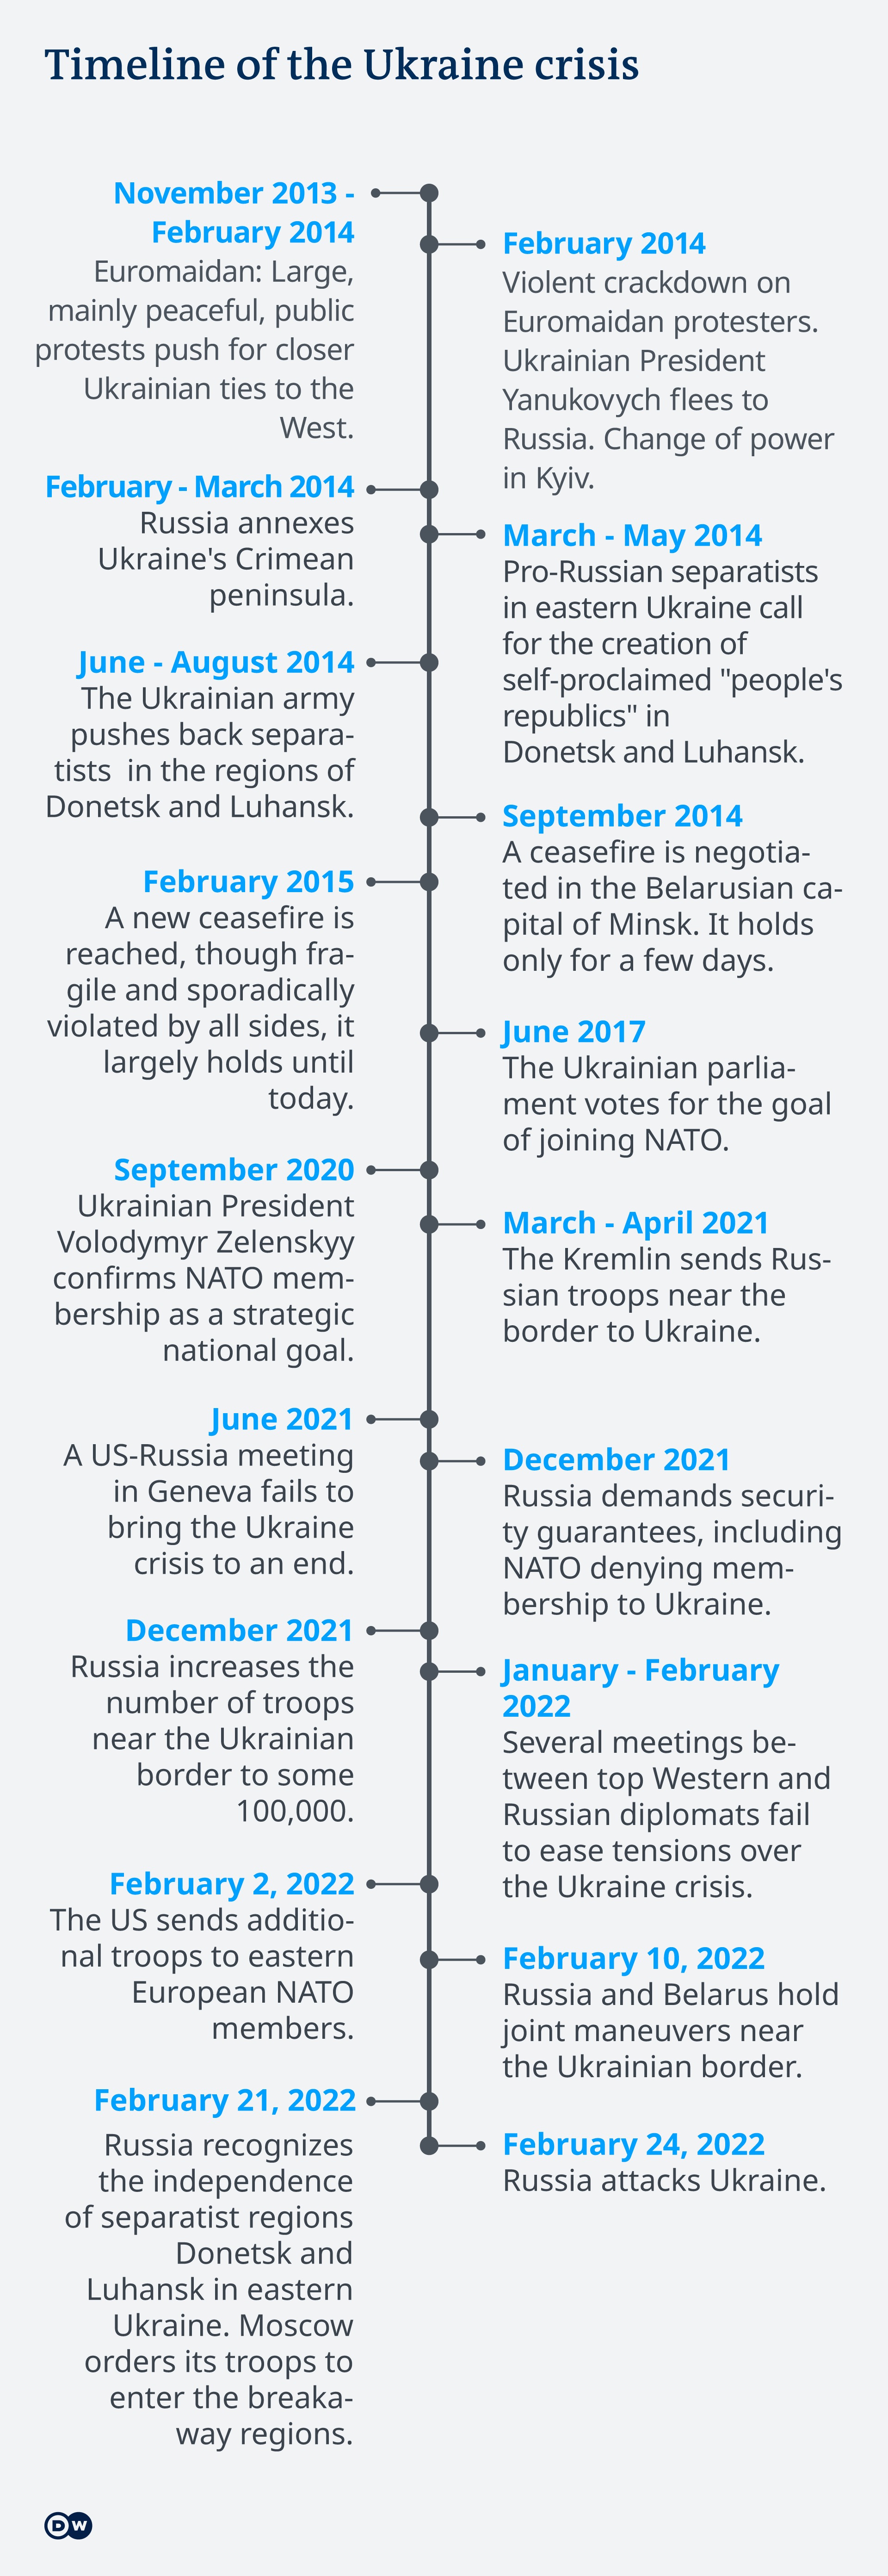 A timeline of the Ukraine-Russia crisis